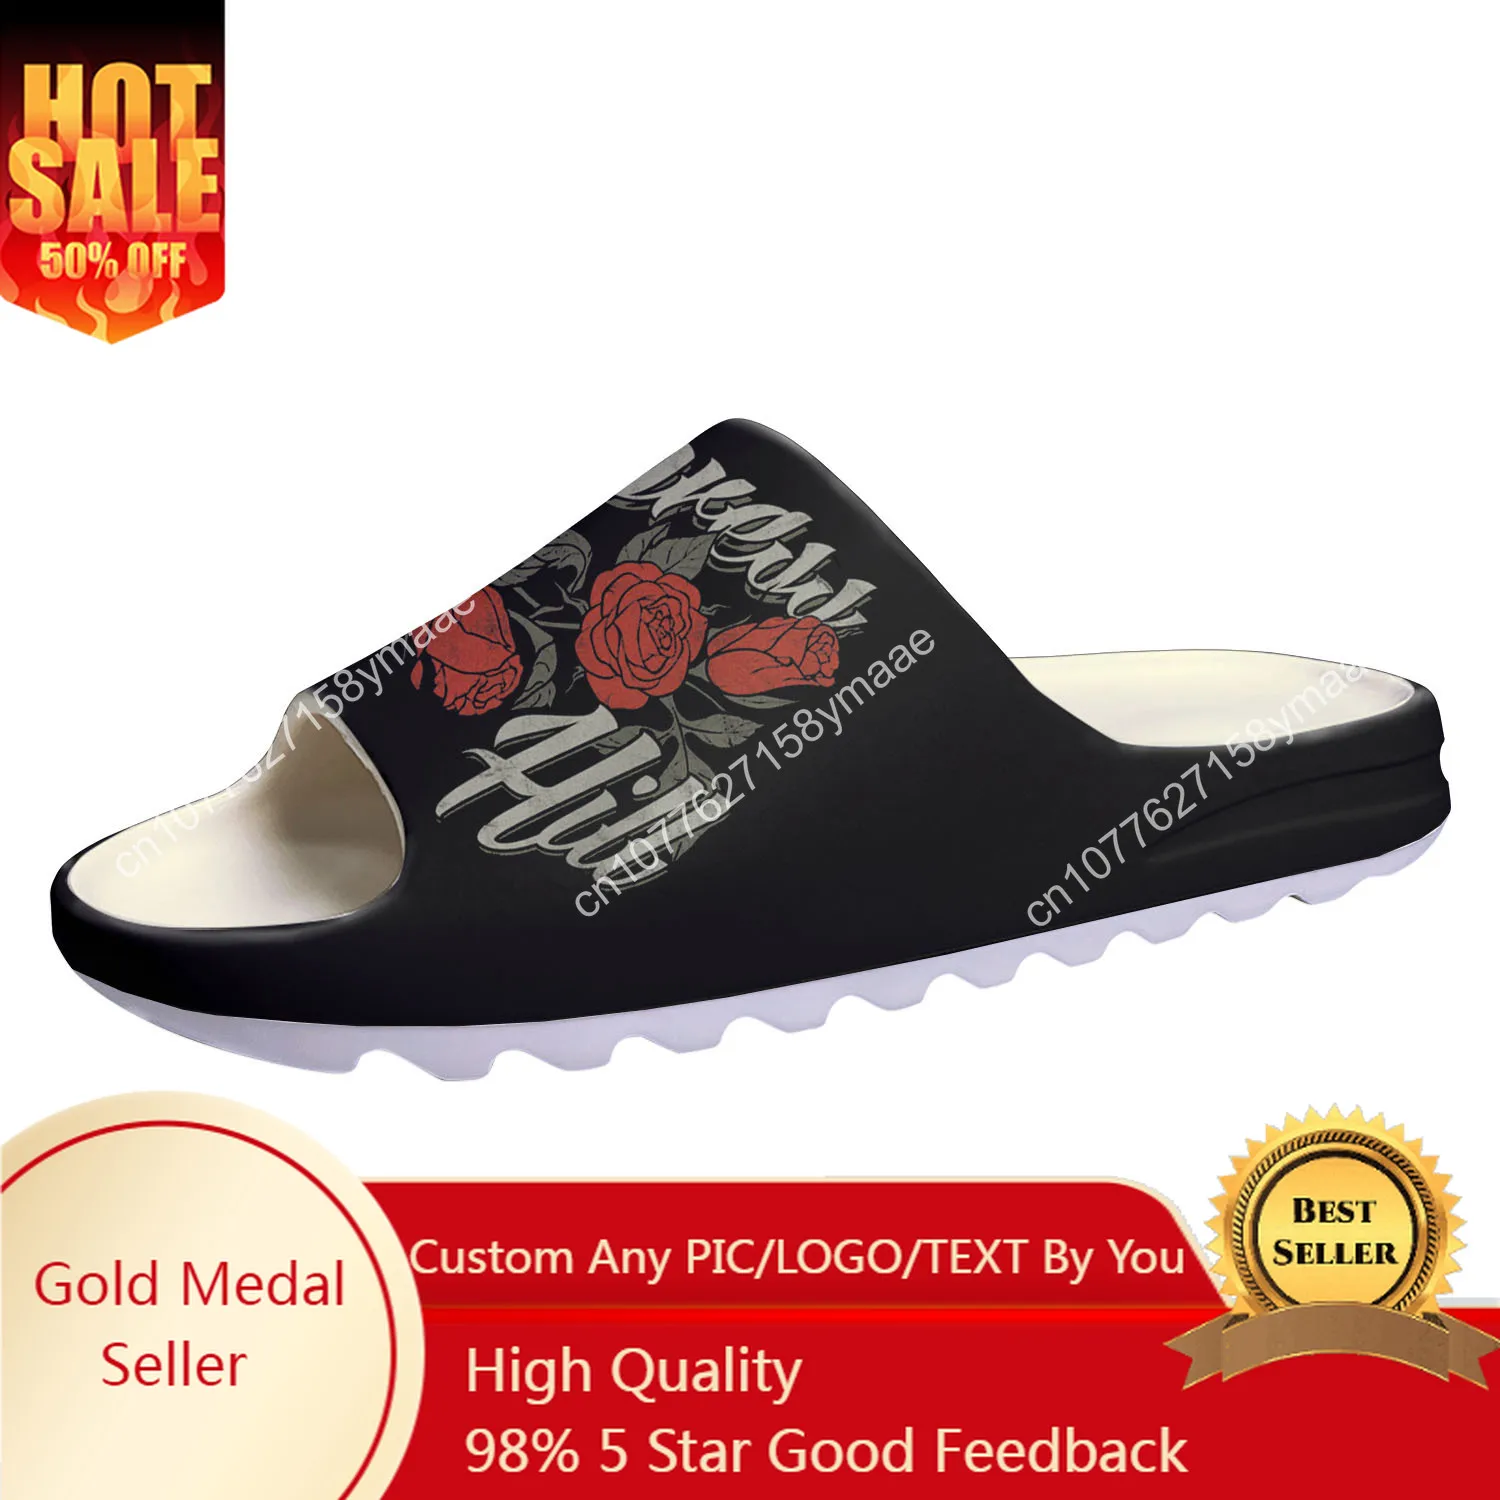 

Cypress Hill Soft Sole Sllipers Home Clogs Step on Water Shoes Mens Womens Teenager Bathroom Beach Black Sunday on Shit Sandals